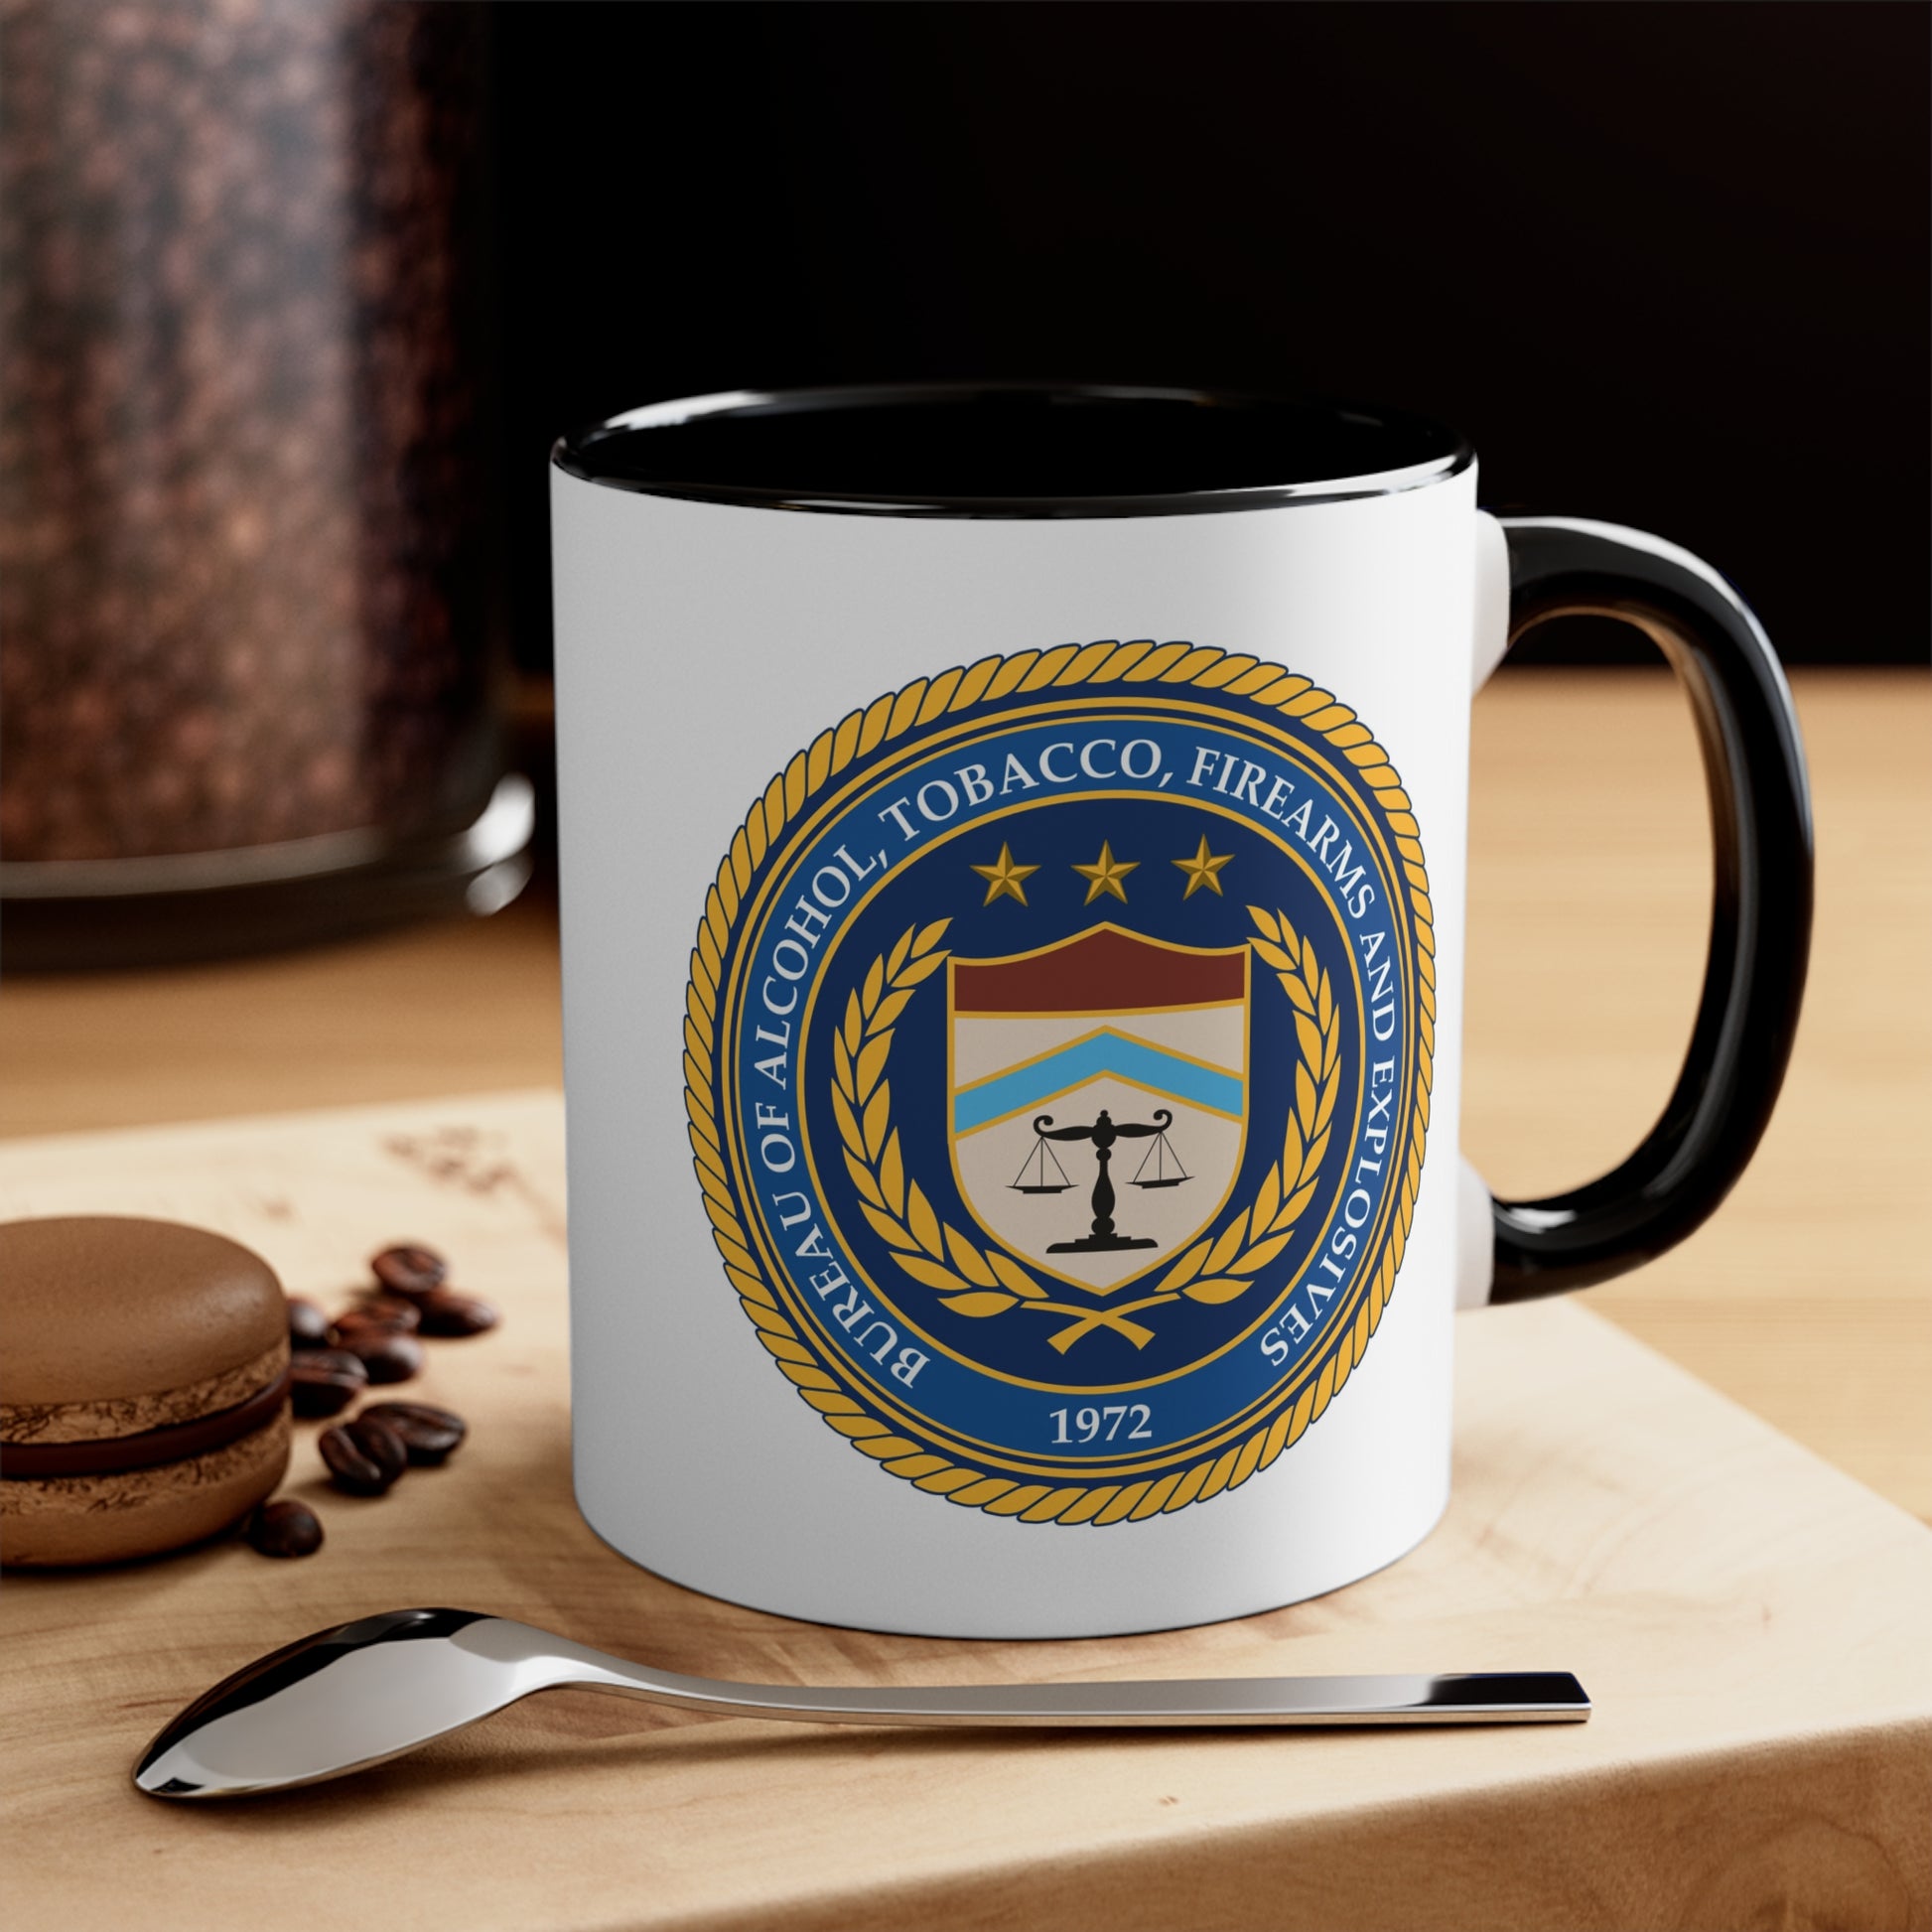 US ATF Seal Coffee Mug - Double Sided Black Accent White Ceramic 11oz by TheGlassyLass